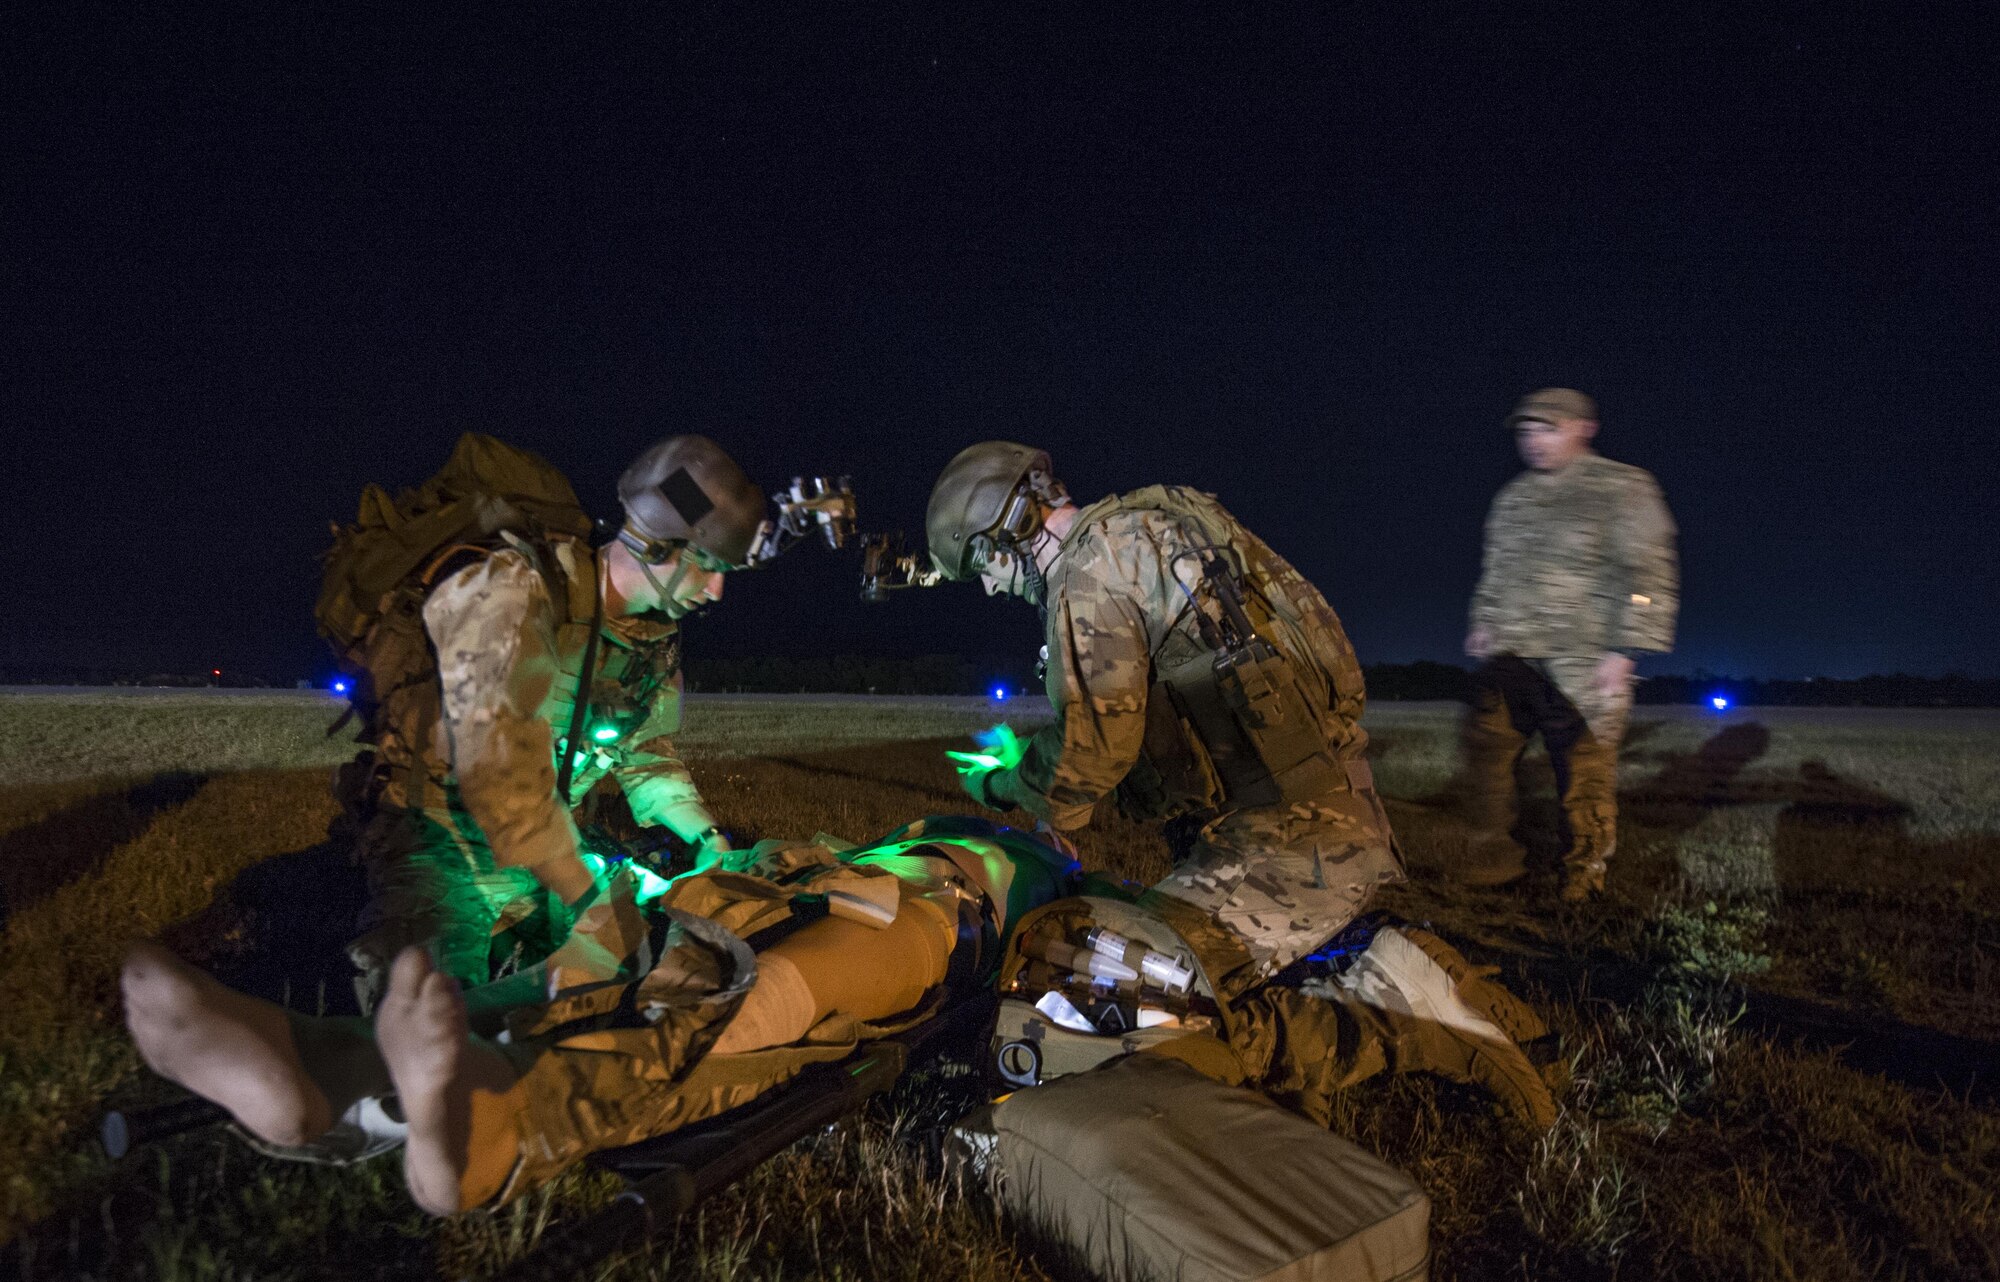 A U.S. Air Force special operations forces medical element team member, 1st Special Operations Support Squadron, and a U.S. Army Special Operations Resuscitation Team member, 528th Sustainment Brigade, examine a patient on Crestview Airfield, Fla., April 23, 2015. Emerald Warrior is the Department of Defense's only irregular warfare exercise, allowing joint and combined partners to train together and prepare for real world contingency operations. (U.S. Air Force photo by Senior Airman Cory D. Payne/Released)